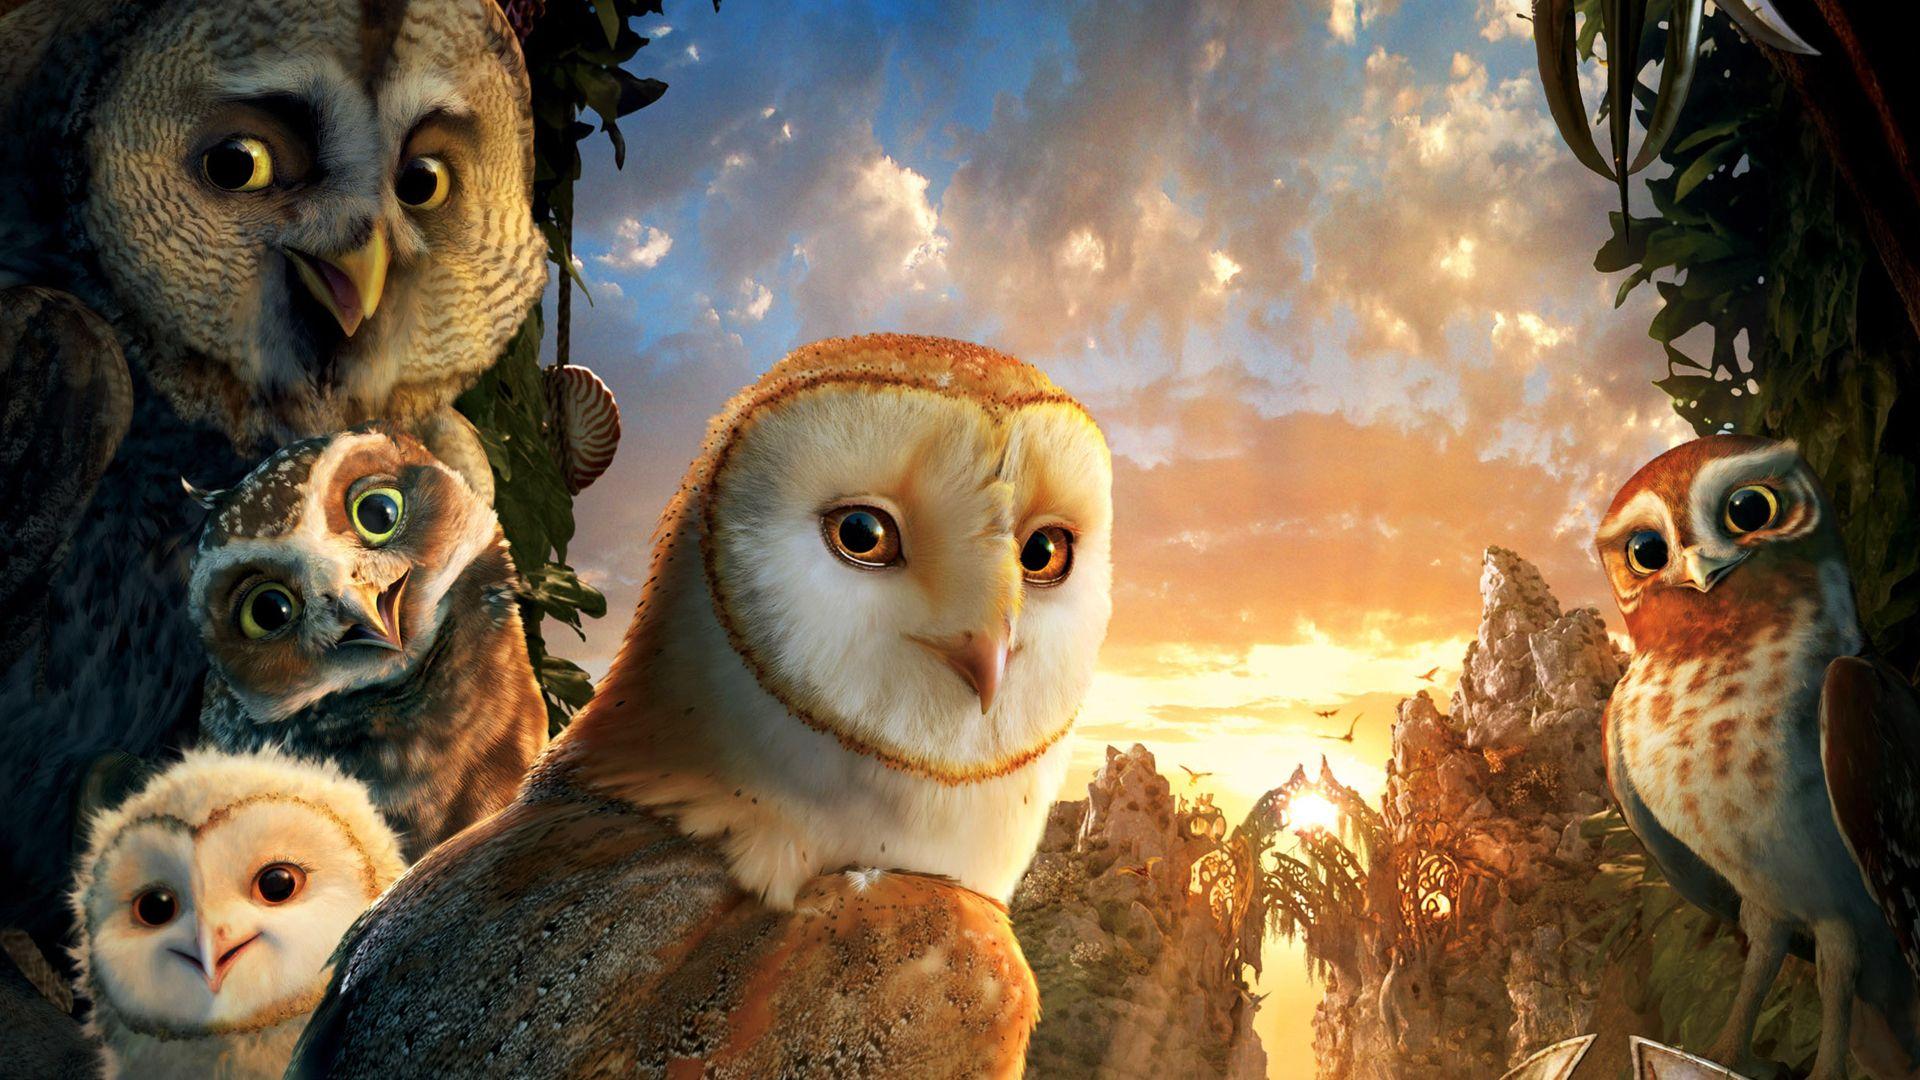 Legend Of The Guardians The Owls Of Ga Hoole wallpaper